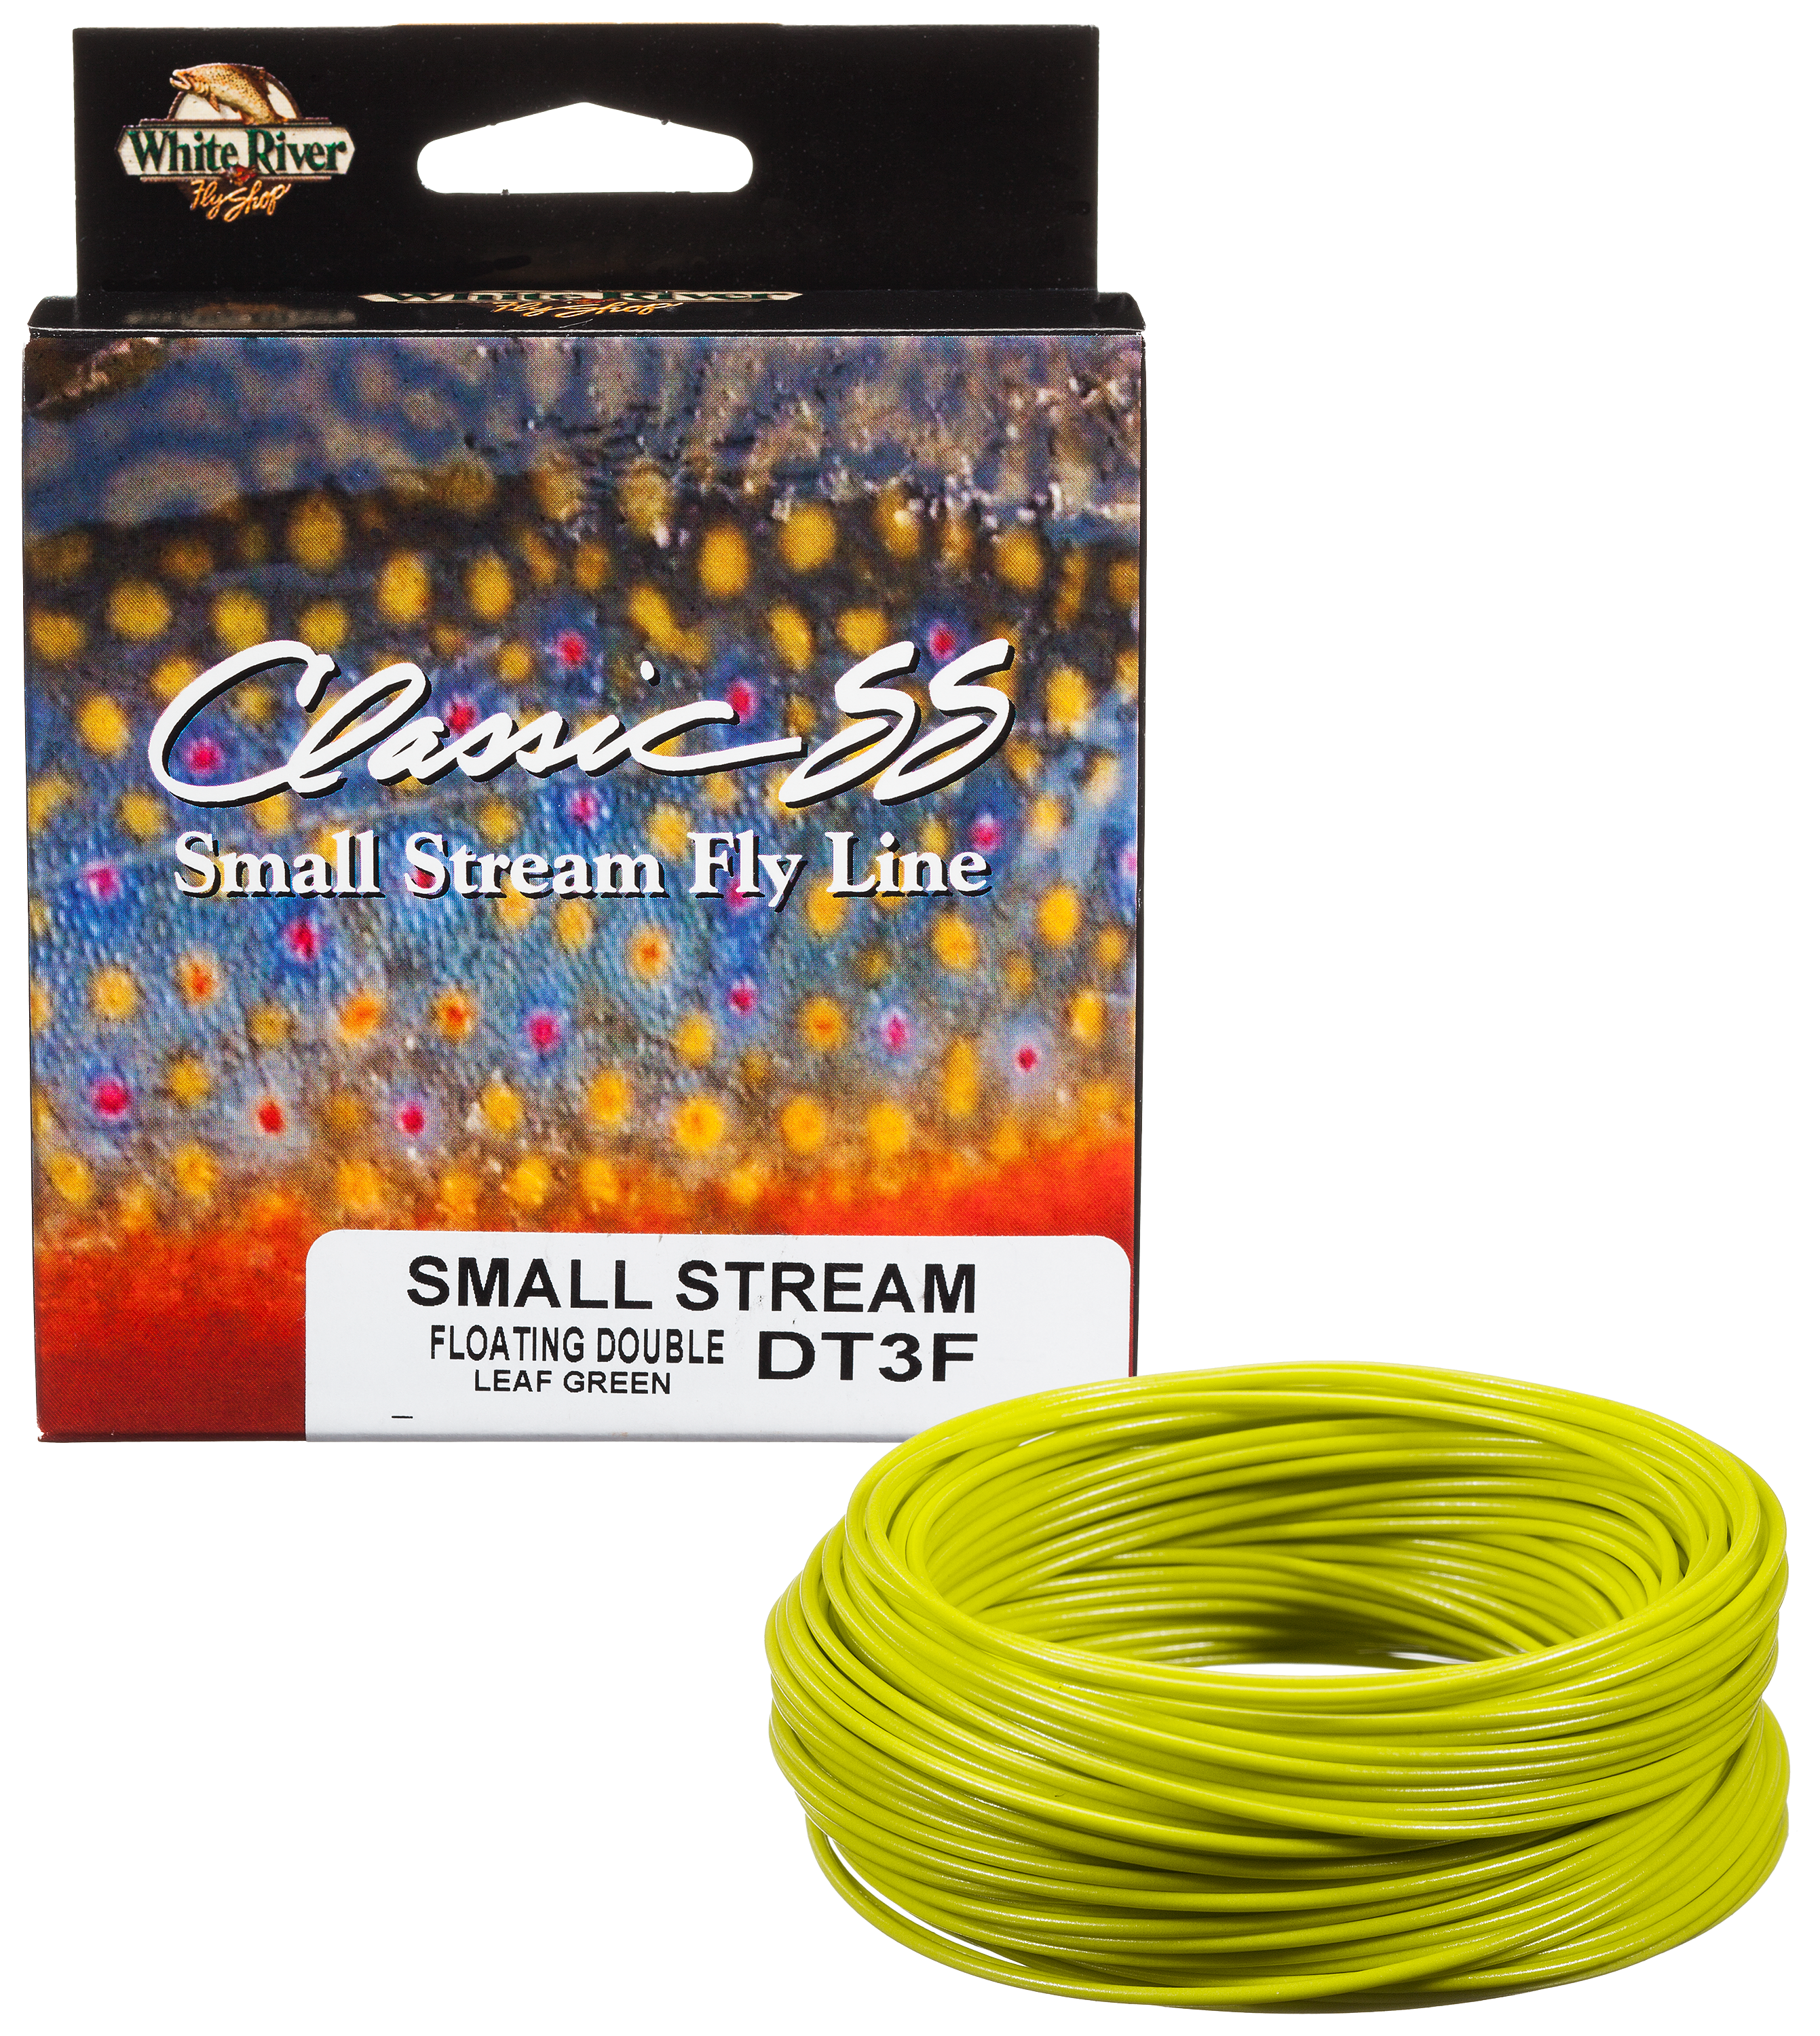 White River Fly Shop Classic Small Stream Fly Line - Line Weight 4